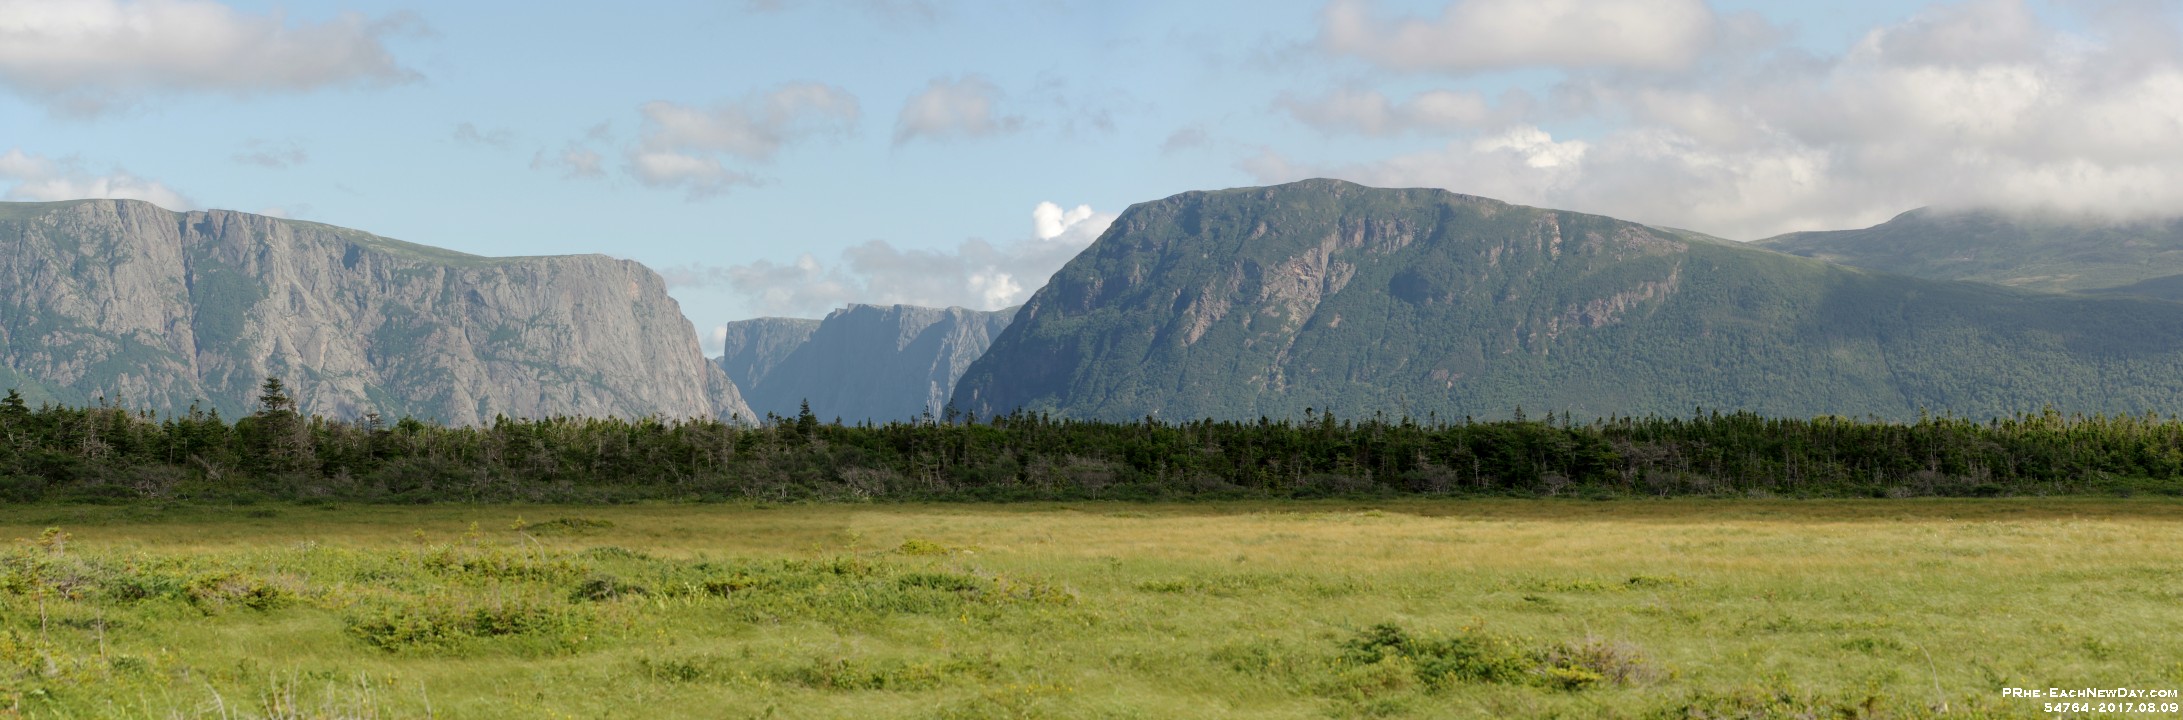 54764PaCrLeRe - Along Route 430 - Views of the Gulf of St Lawrence, Labrador and Gros Morne National Park (enroute from Quirpon to Deer Lake)